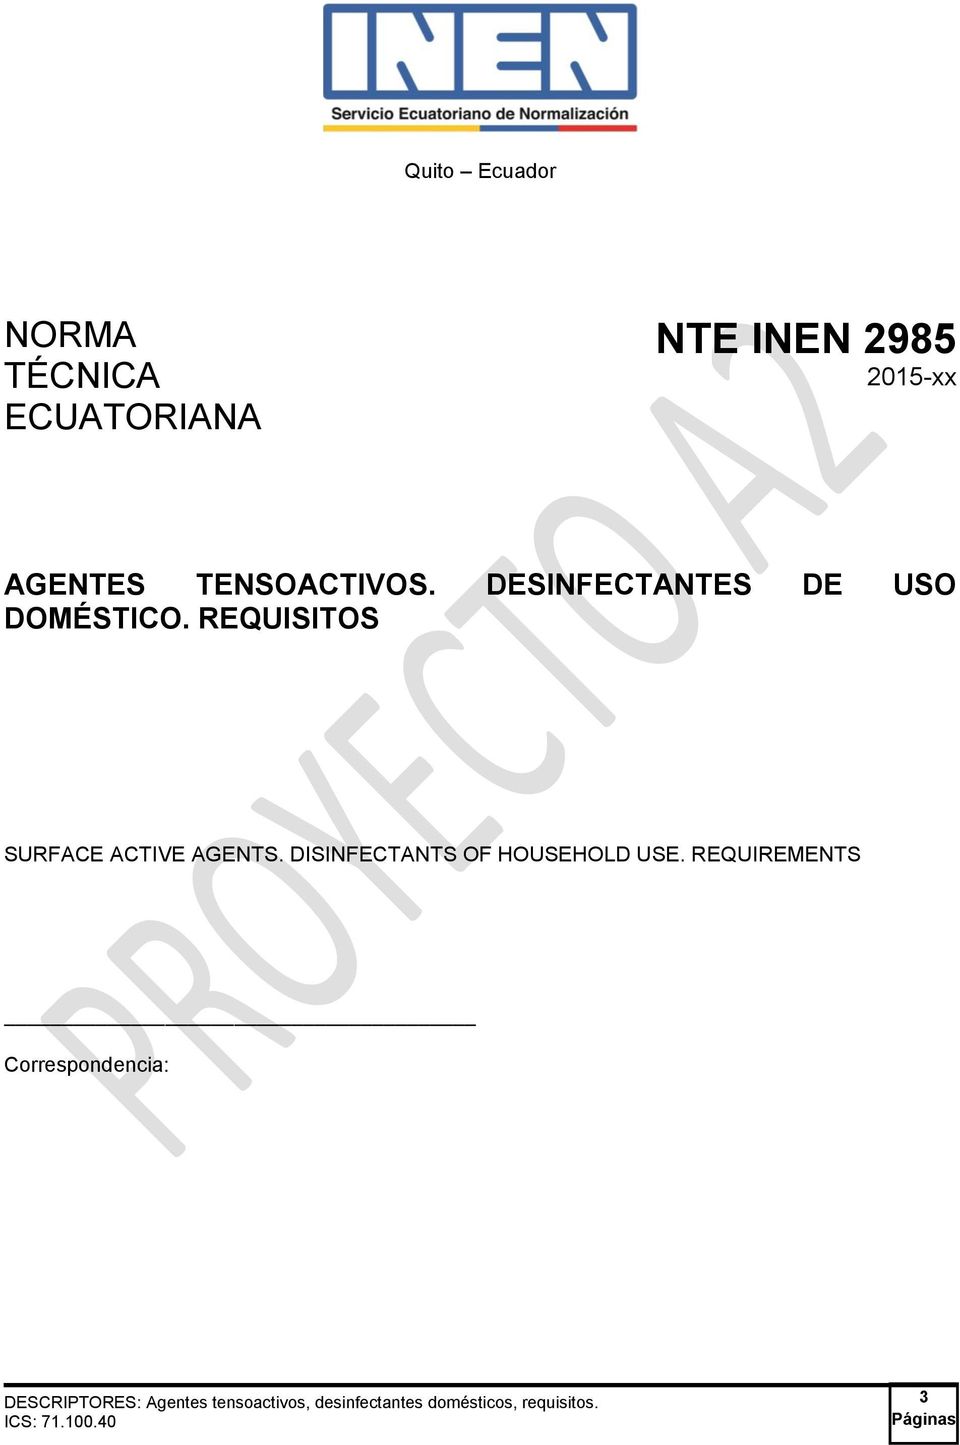 REQUISITOS SURFACE ACTIVE AGENTS. DISINFECTANTS OF HOUSEHOLD USE.